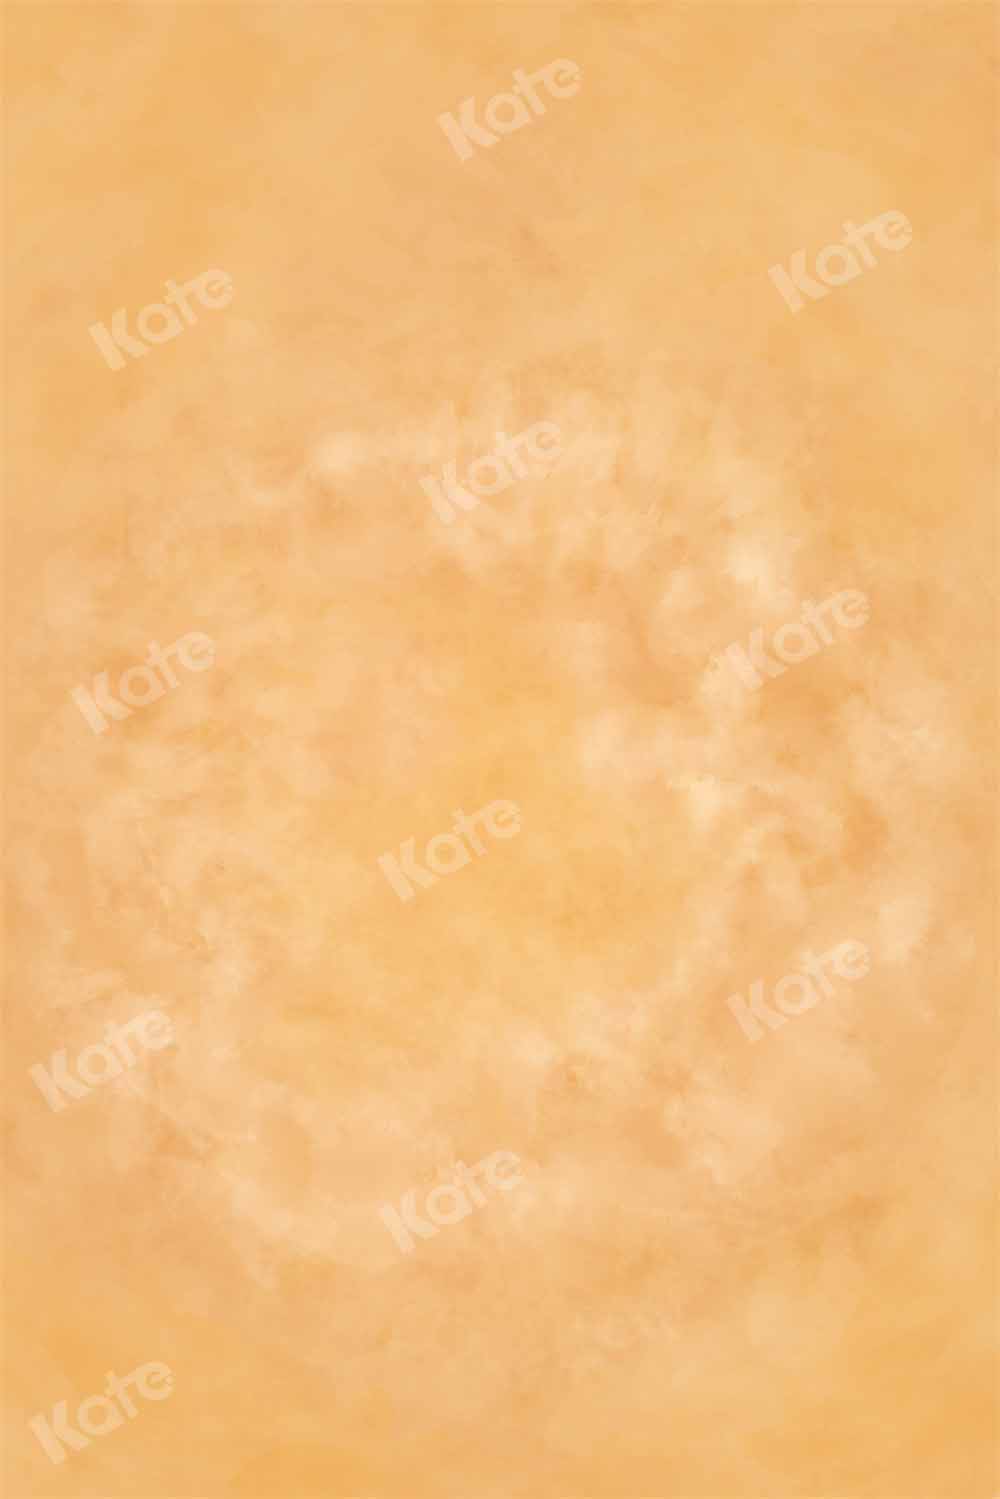 Kate Abstract Texture Backdrop Fine Art Designed by Kate Image